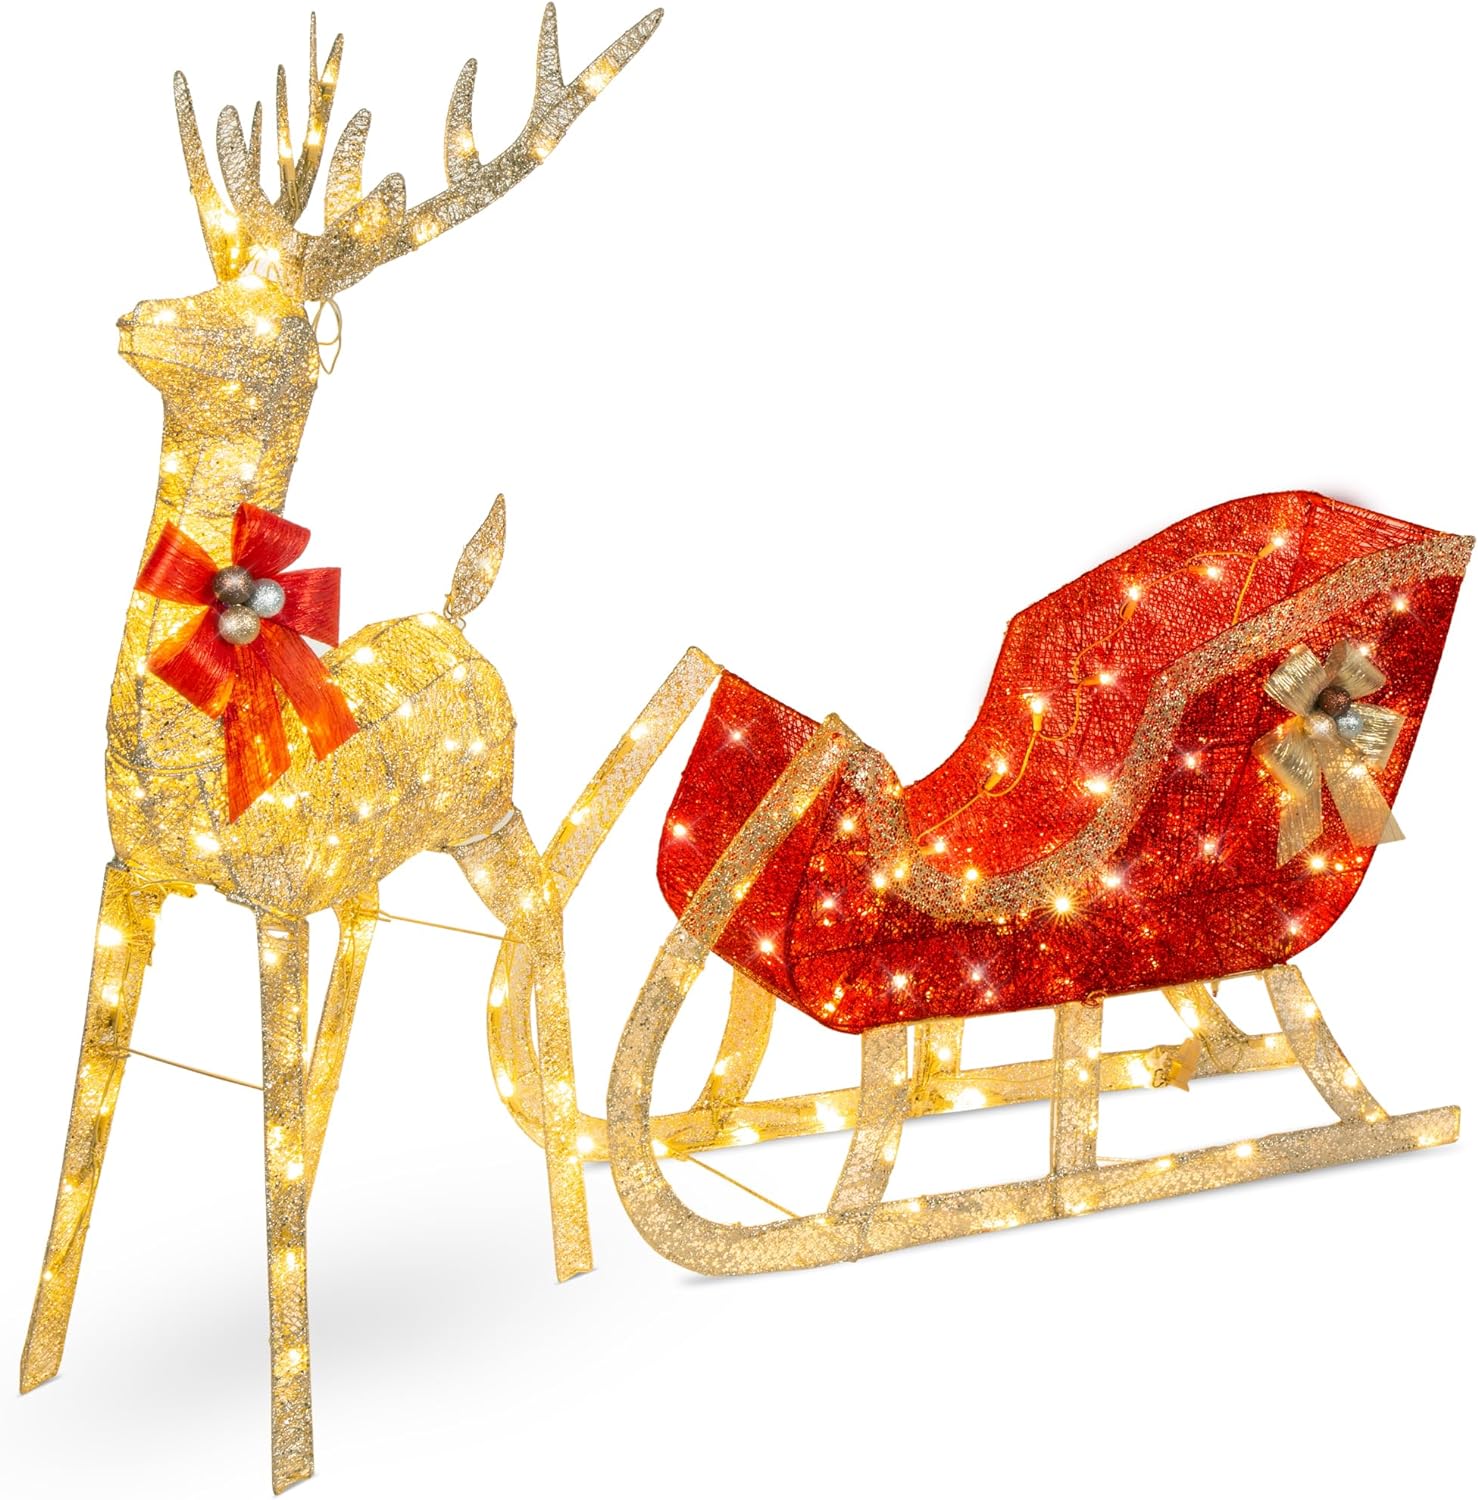 Best Choice Products Lighted Christmas 4ft Reindeer & Sleigh Outdoor Yard Decoration Set w/ 205 LED Lights, Stakes - Gold - image 1 of 7